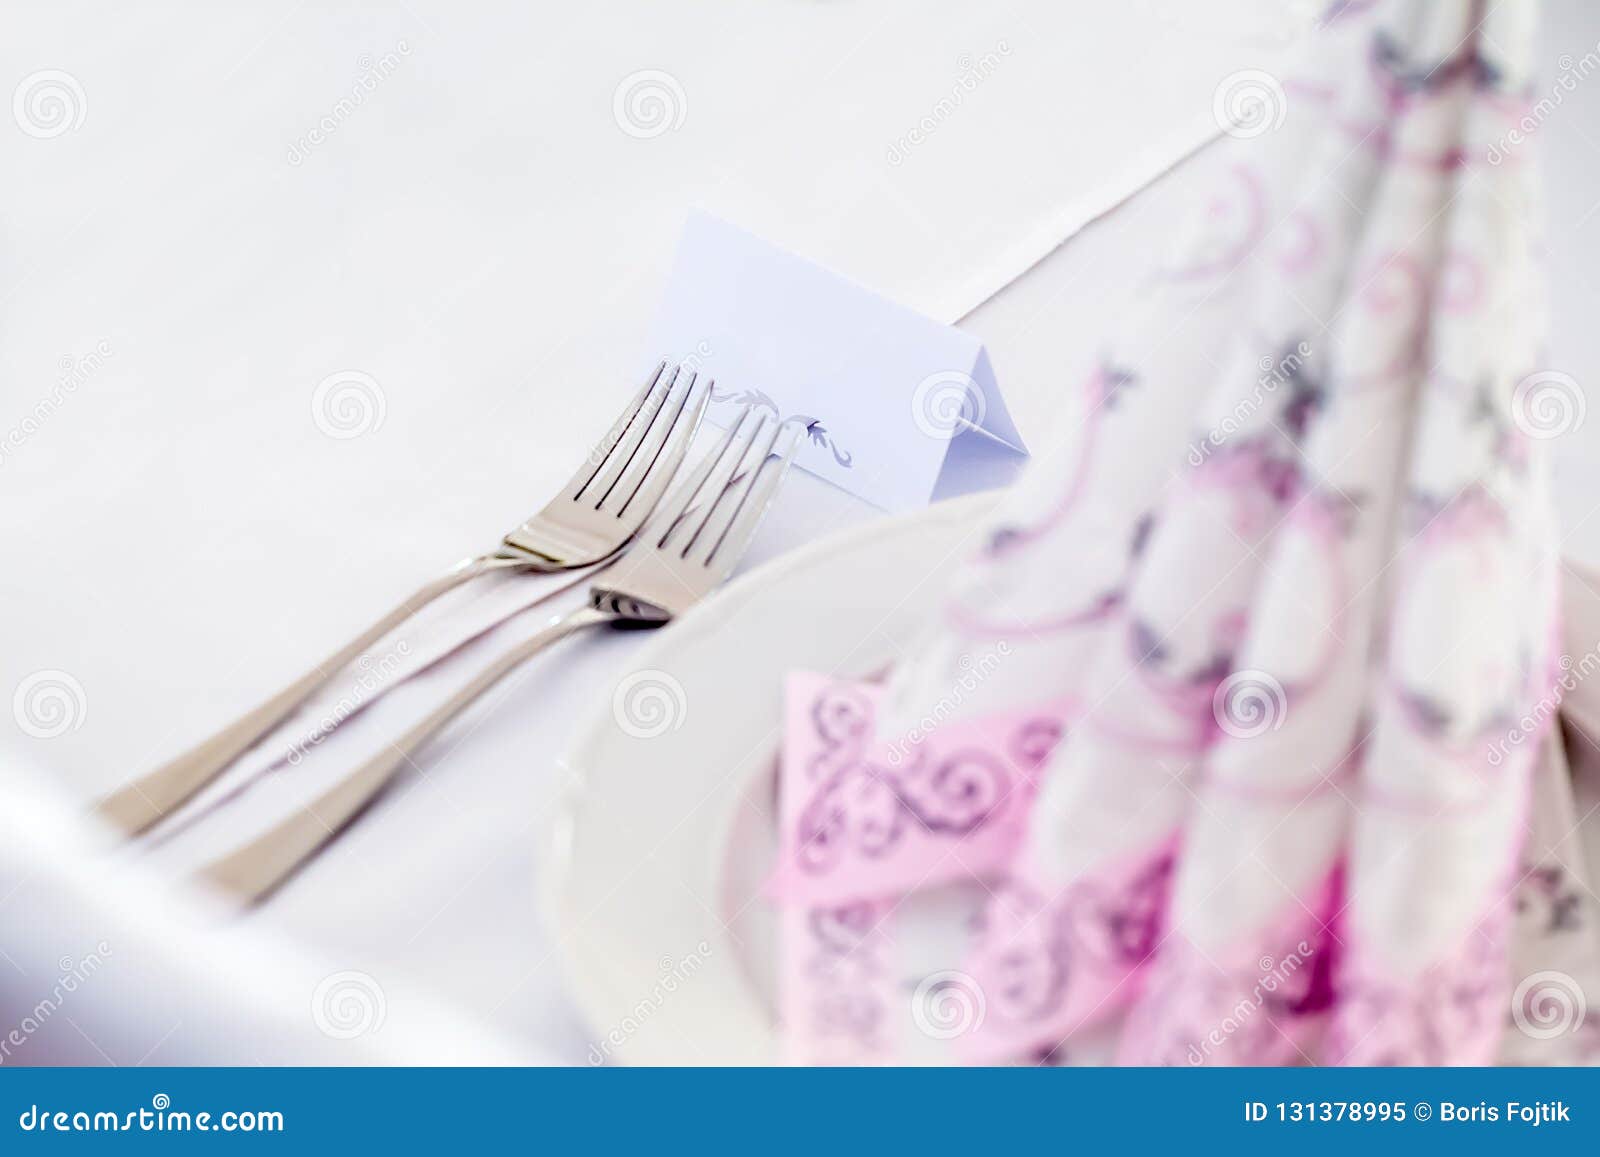 Wedding Table Decoration With Two Forks Stock Image Image Of